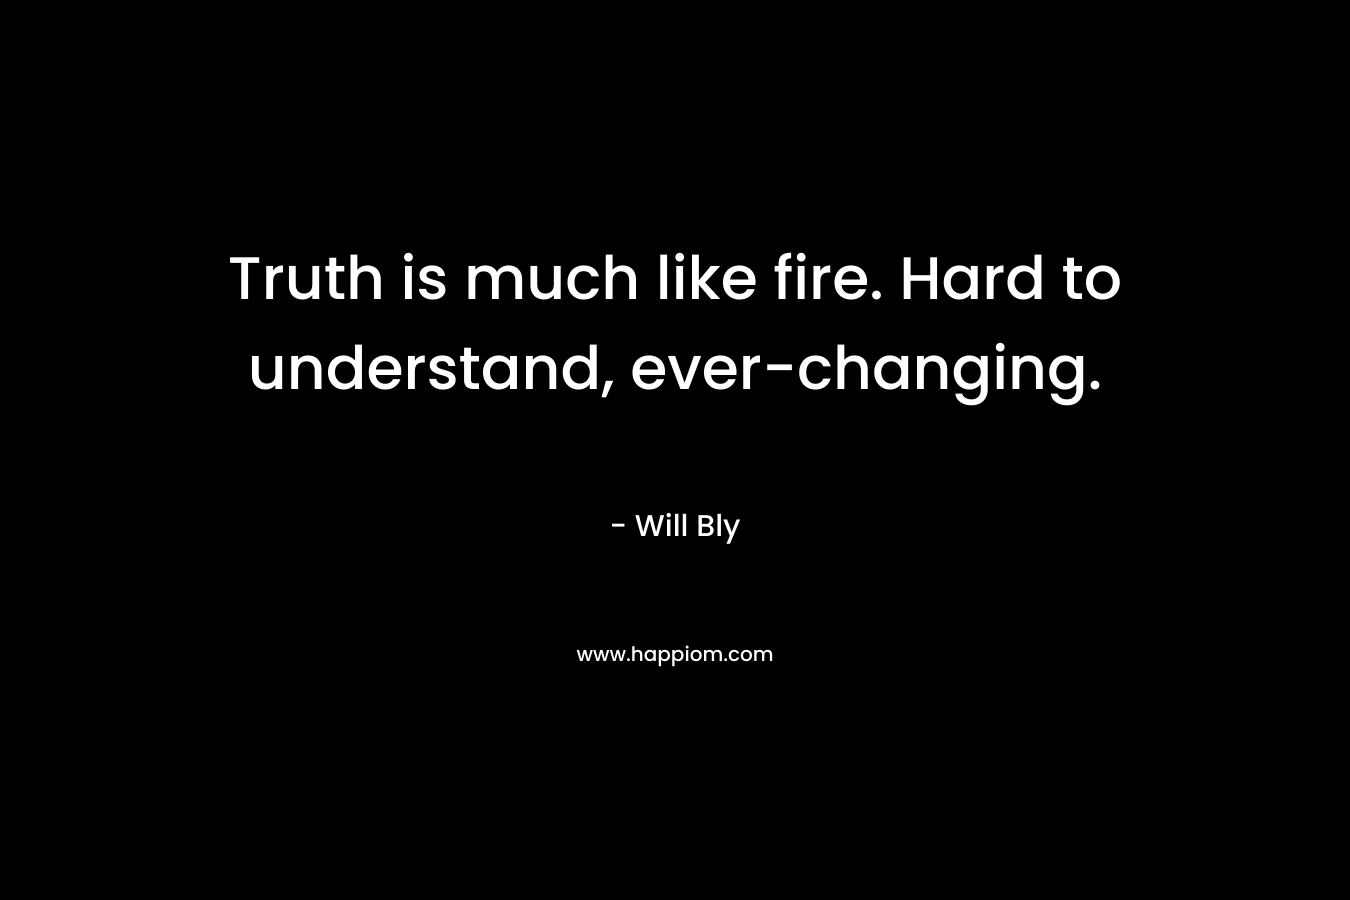 Truth is much like fire. Hard to understand, ever-changing.